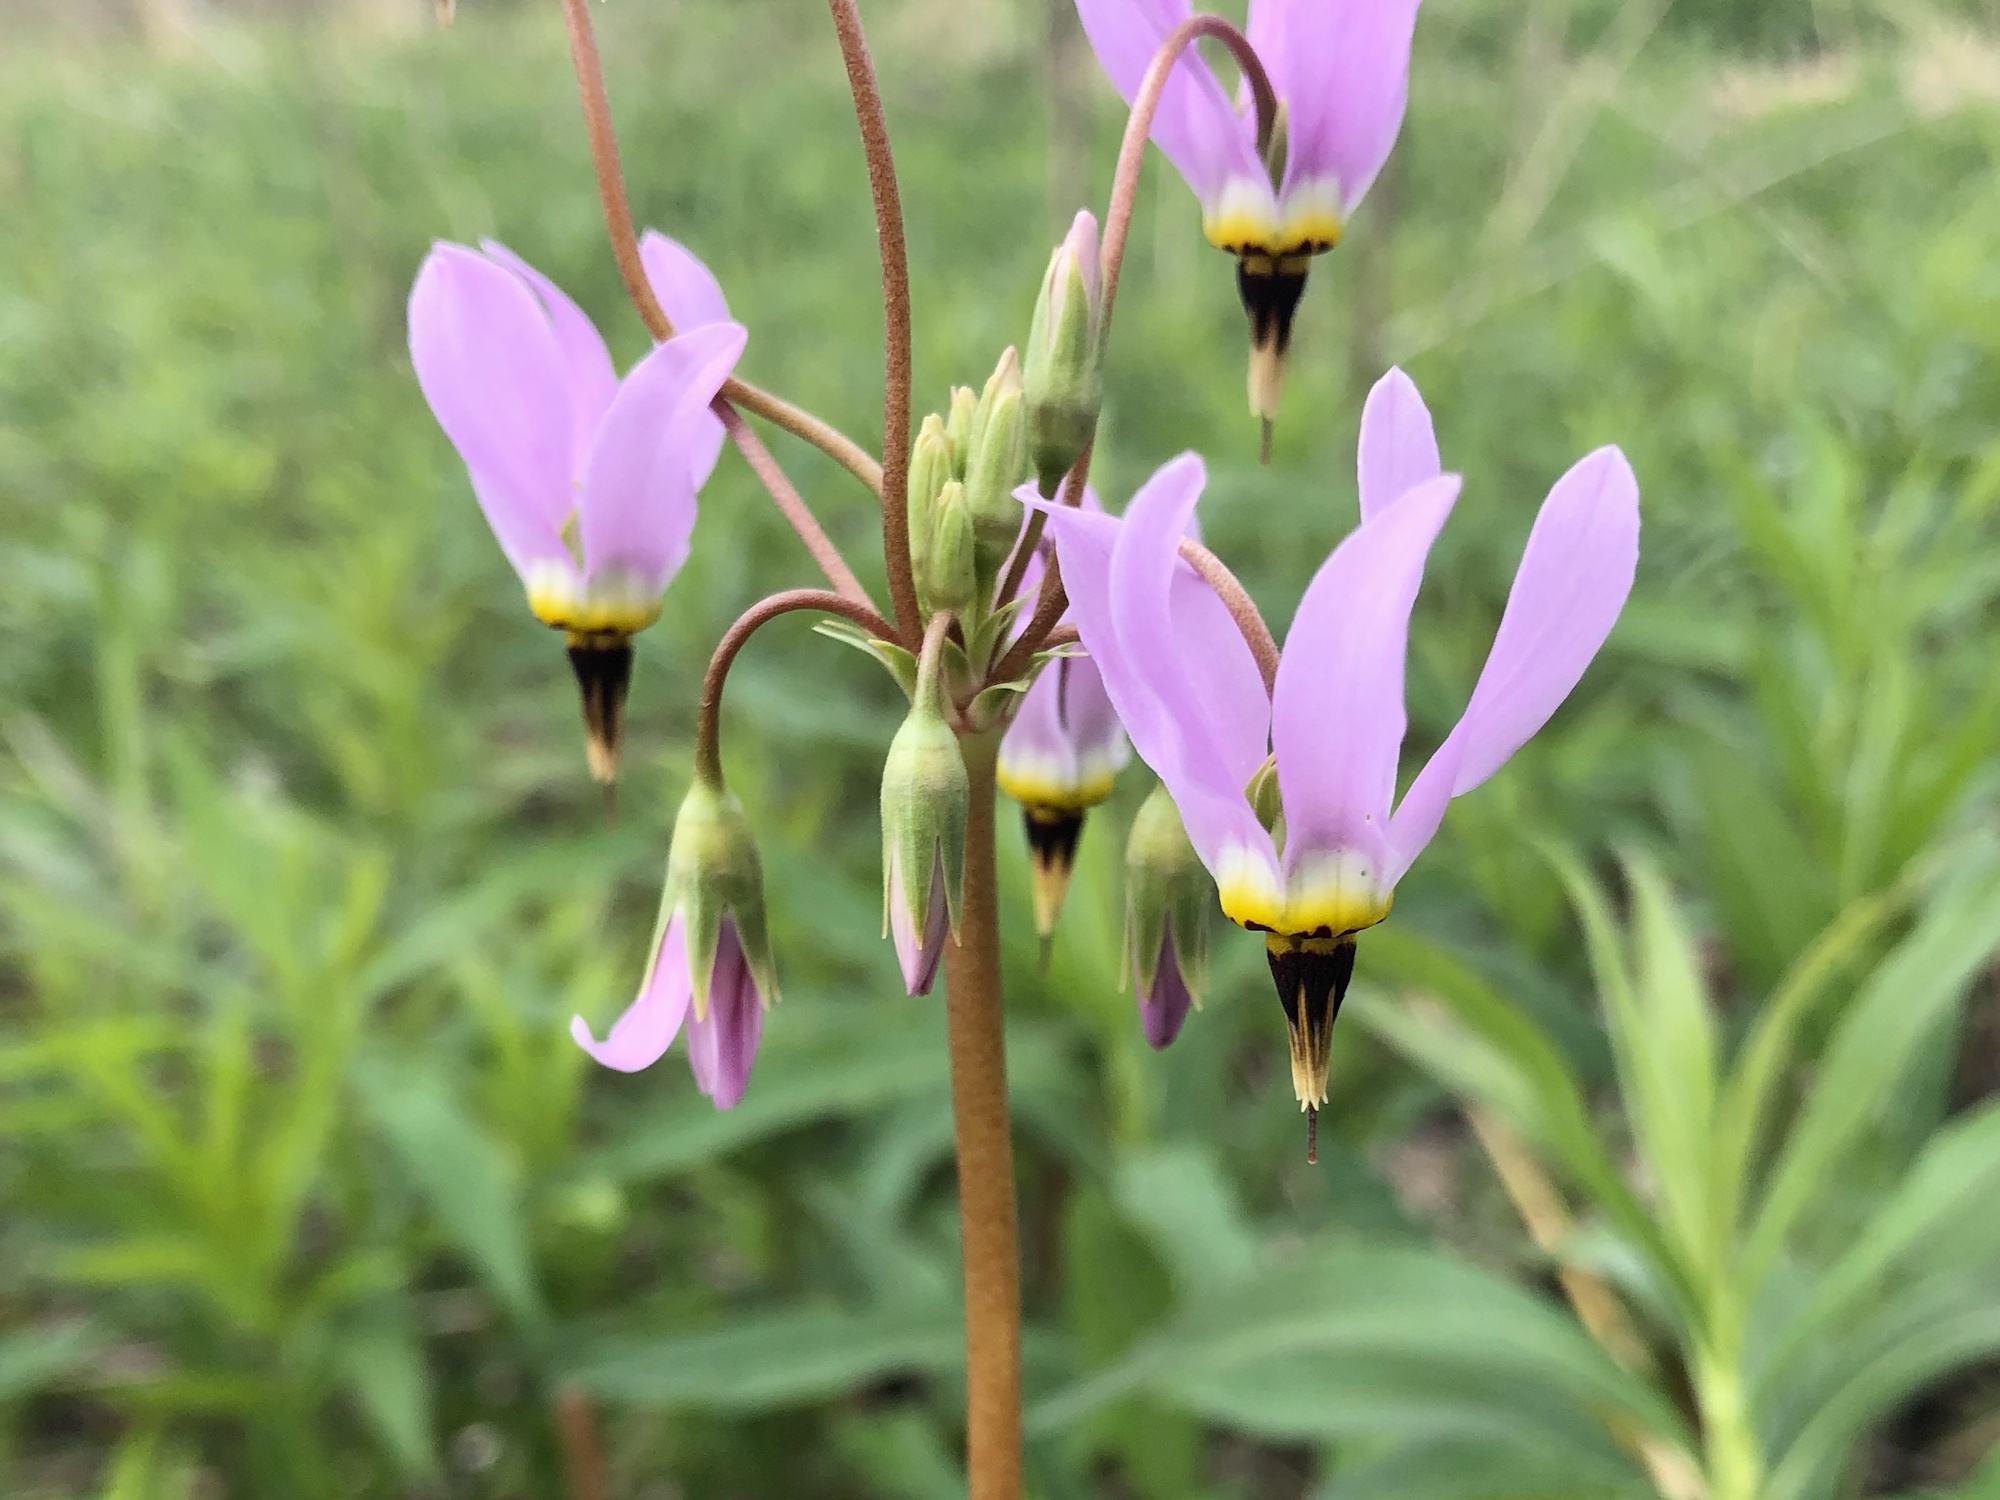 Shooting Star by UW Arboretum Visitors Center on May 21, 2020.